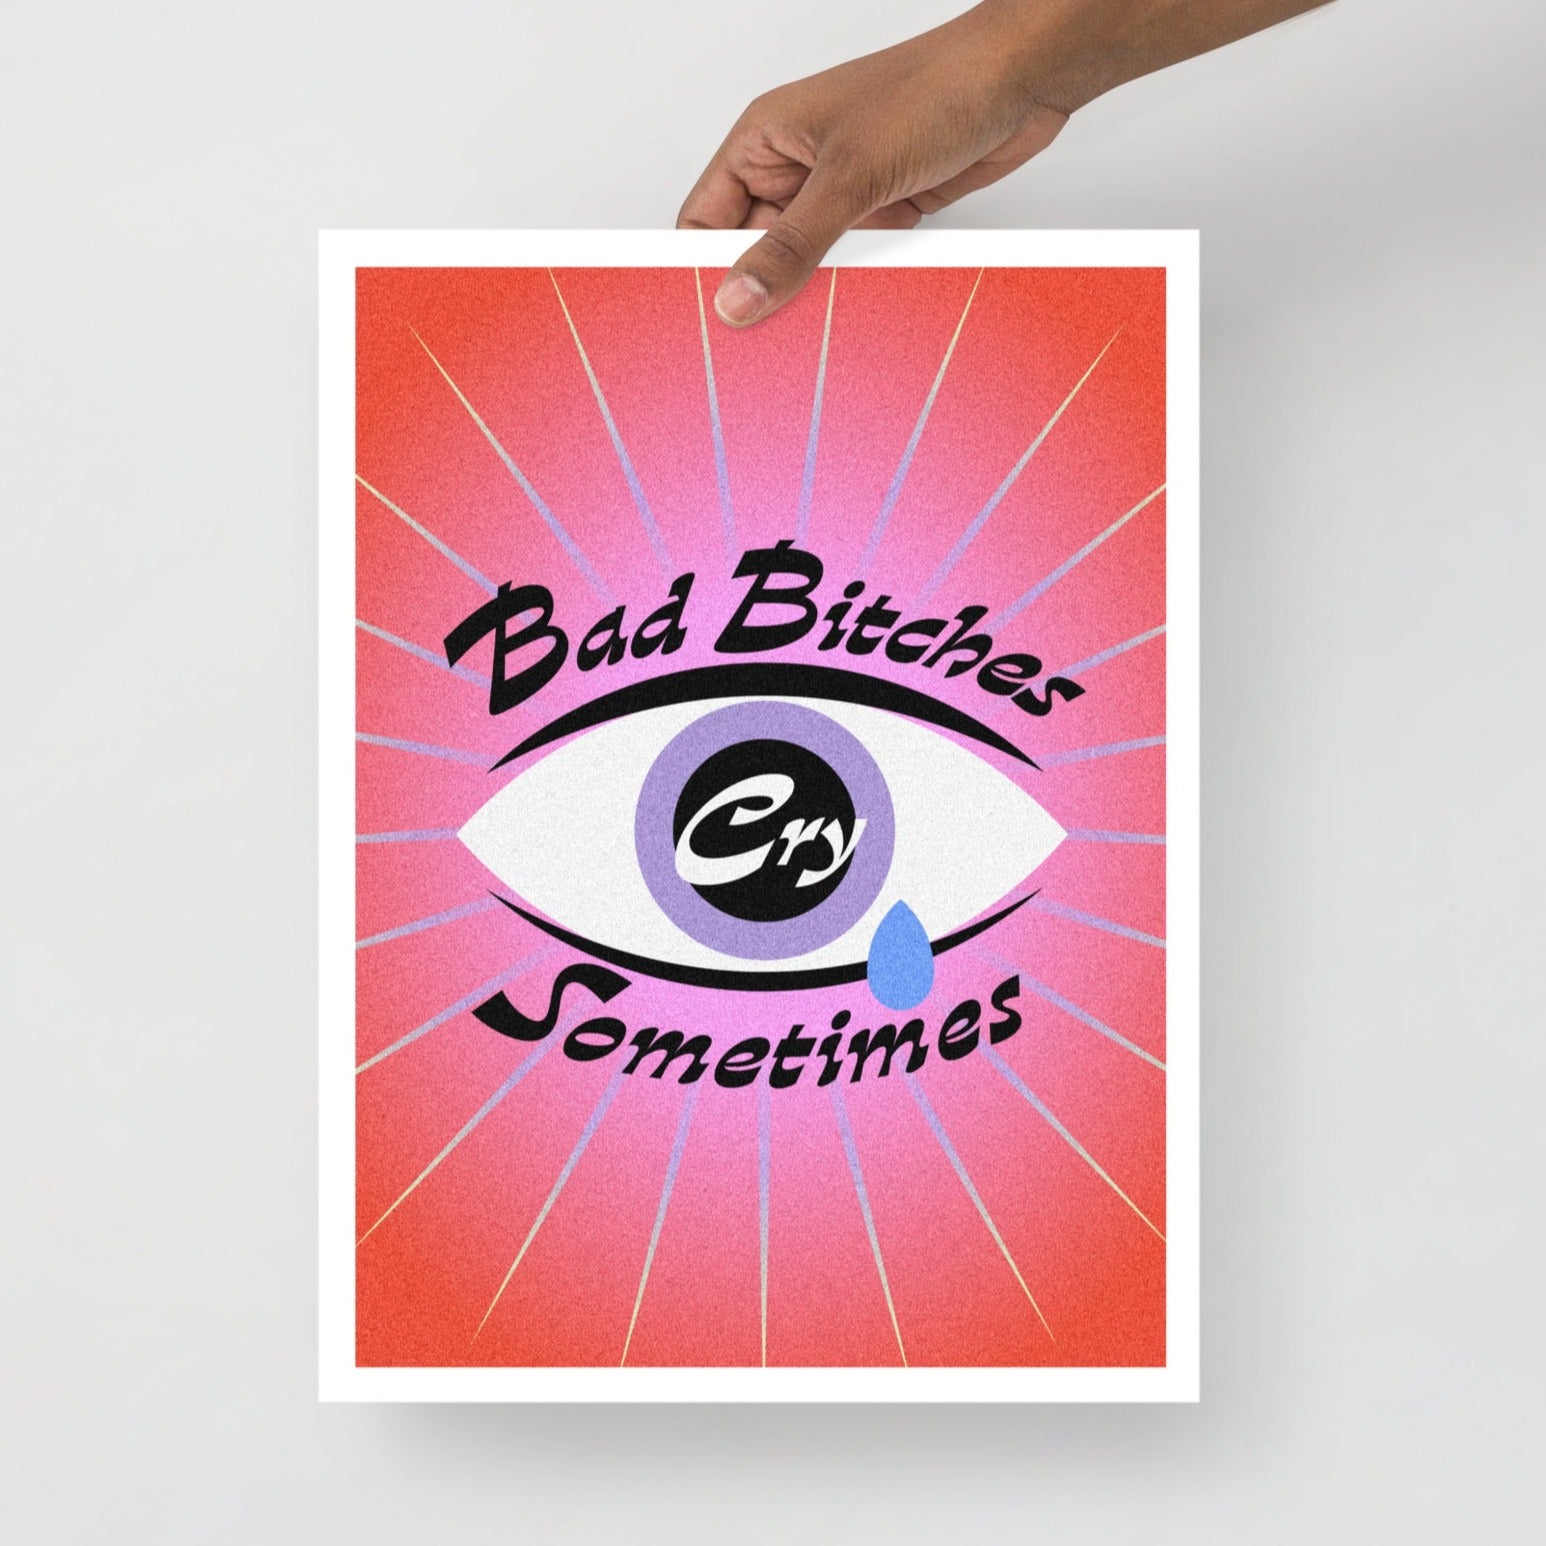 Bad Bitches Cry Sometimes Print (3 Sizes)